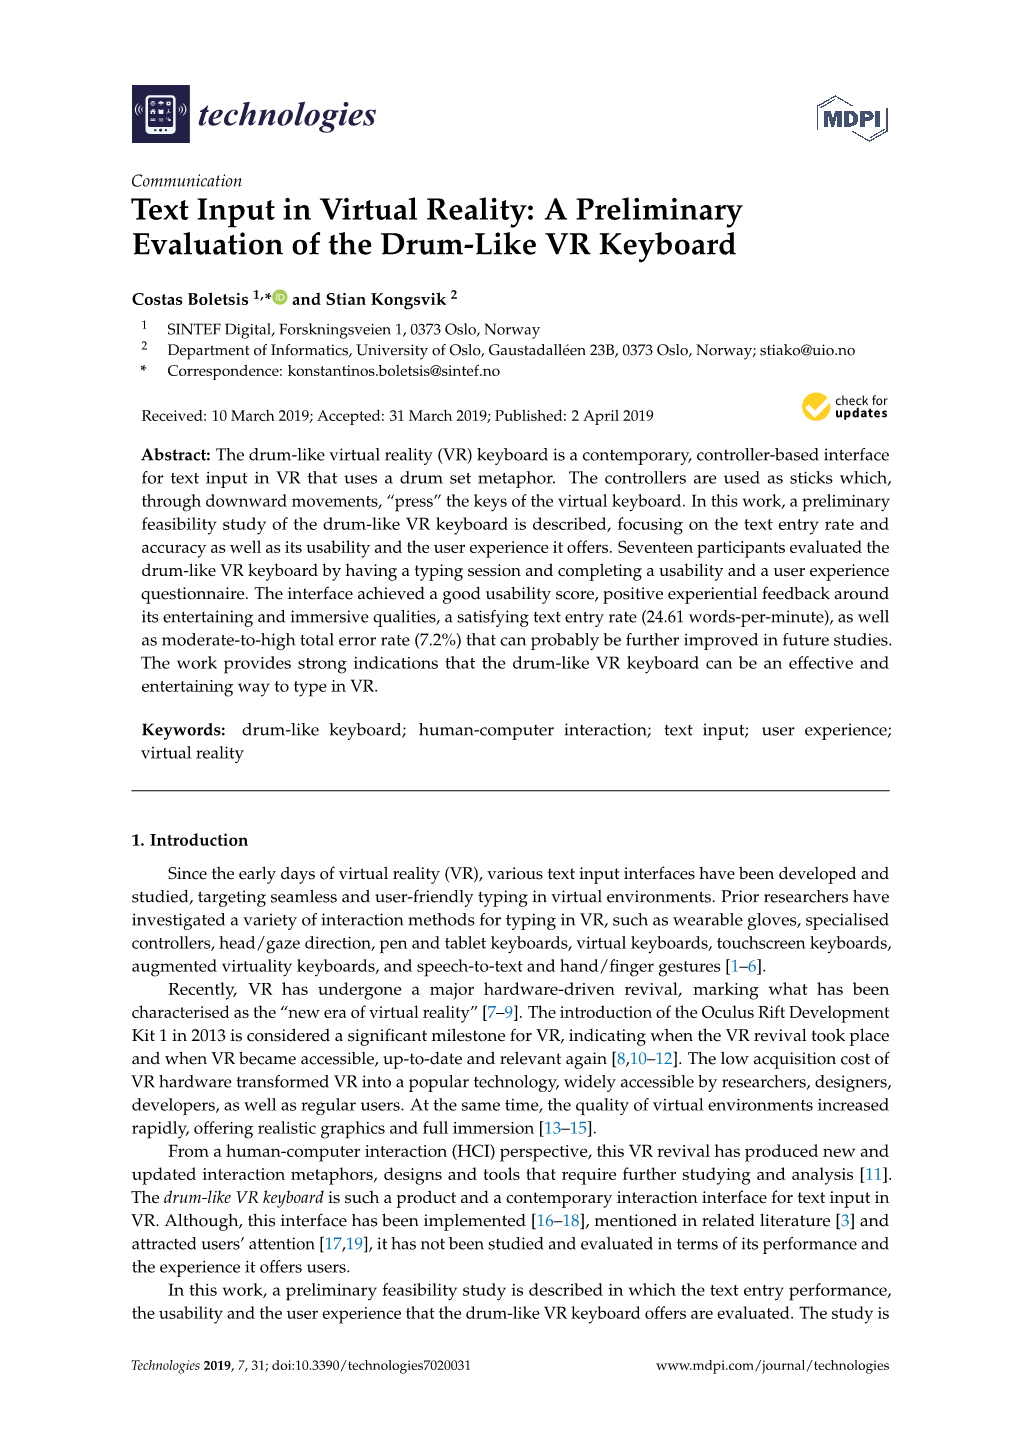 Text Input in Virtual Reality: a Preliminary Evaluation of the Drum-Like VR Keyboard